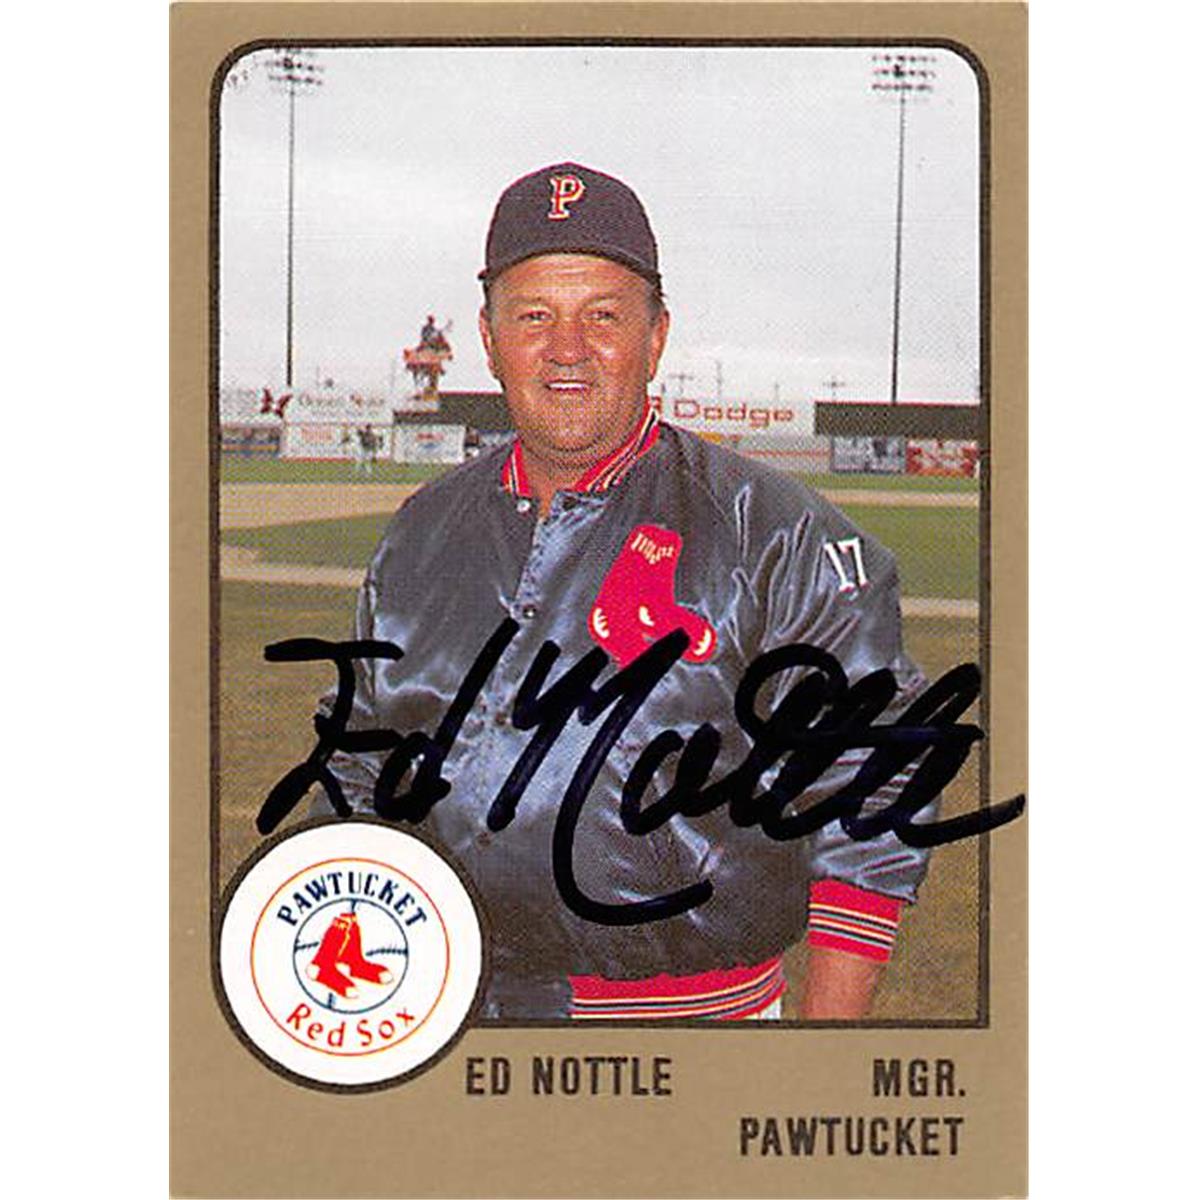 Autograph Warehouse 366507 Ed Nottle Autographed Baseball Card - Pawtucket Red Sox 1988 ProCards Minor League No.469